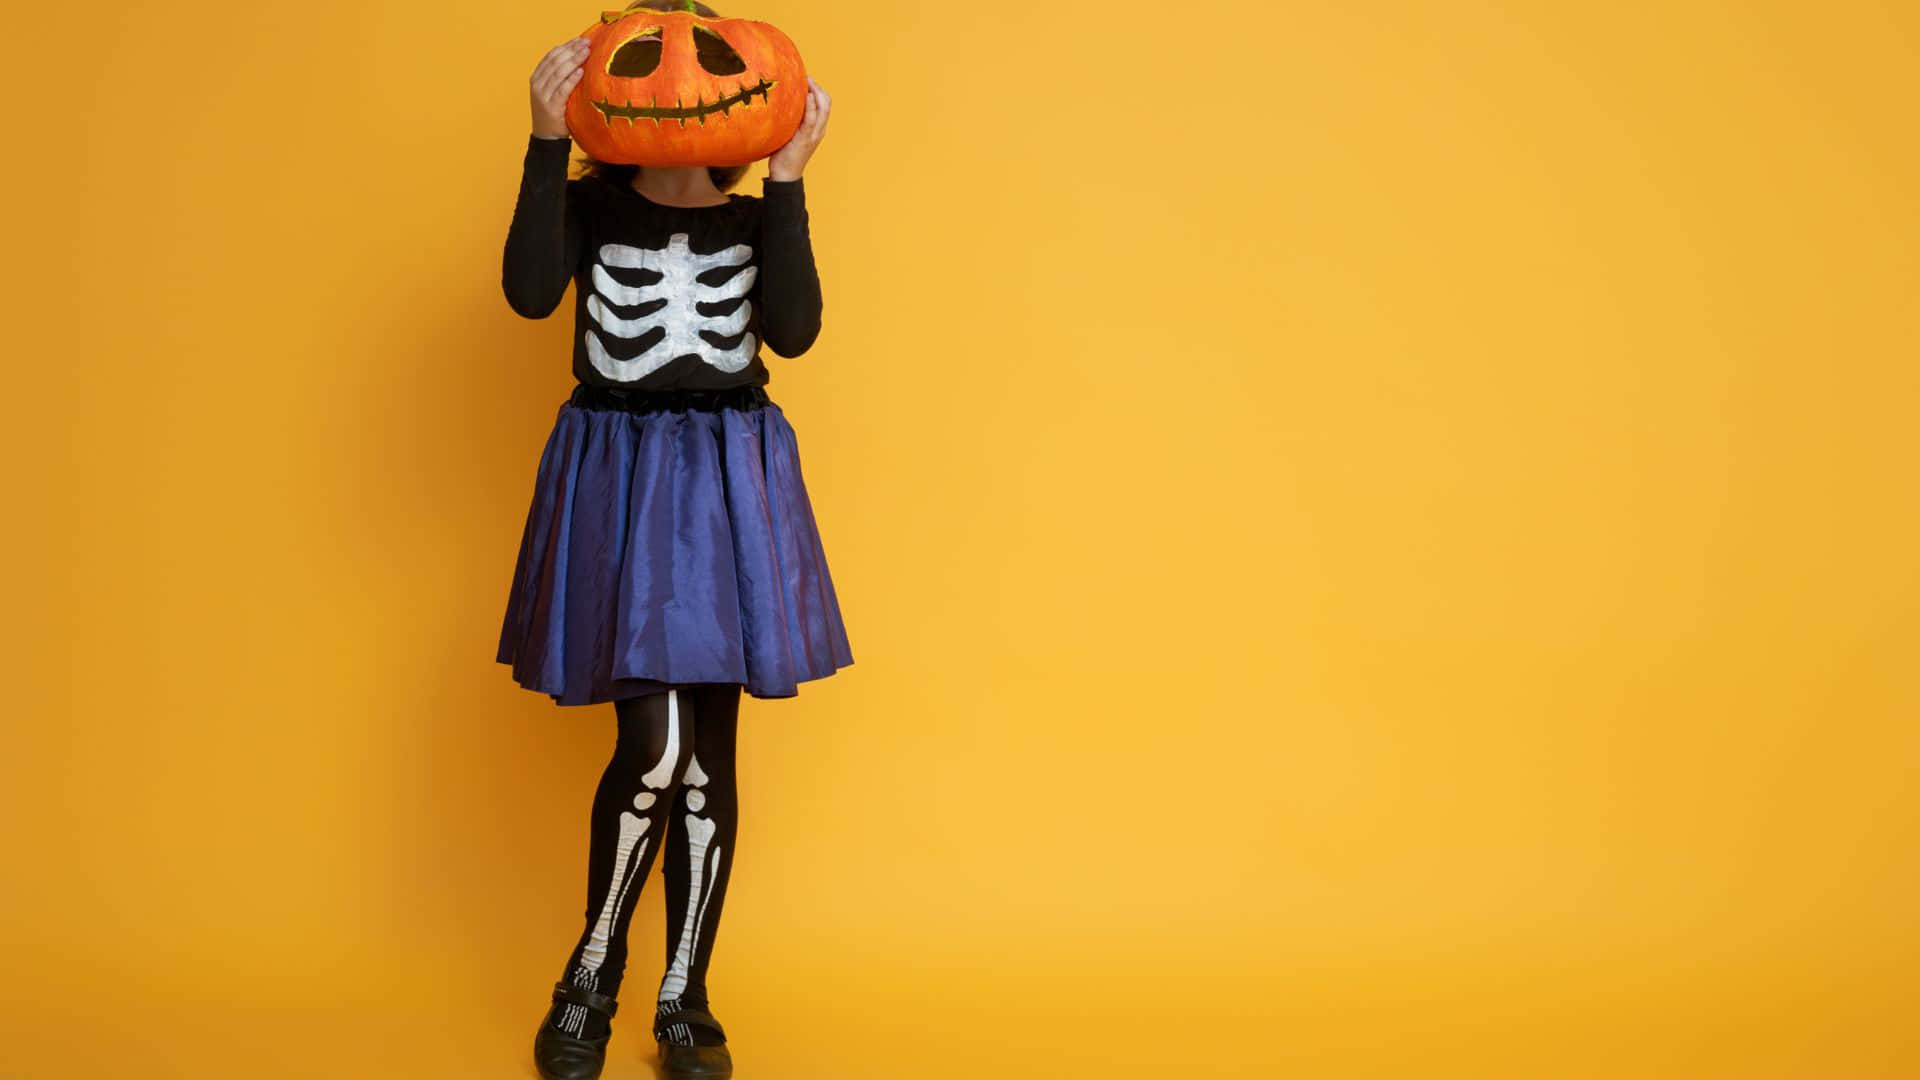 Get creative for your next Halloween bash with these amazing Skeleton Costumes! Wallpaper